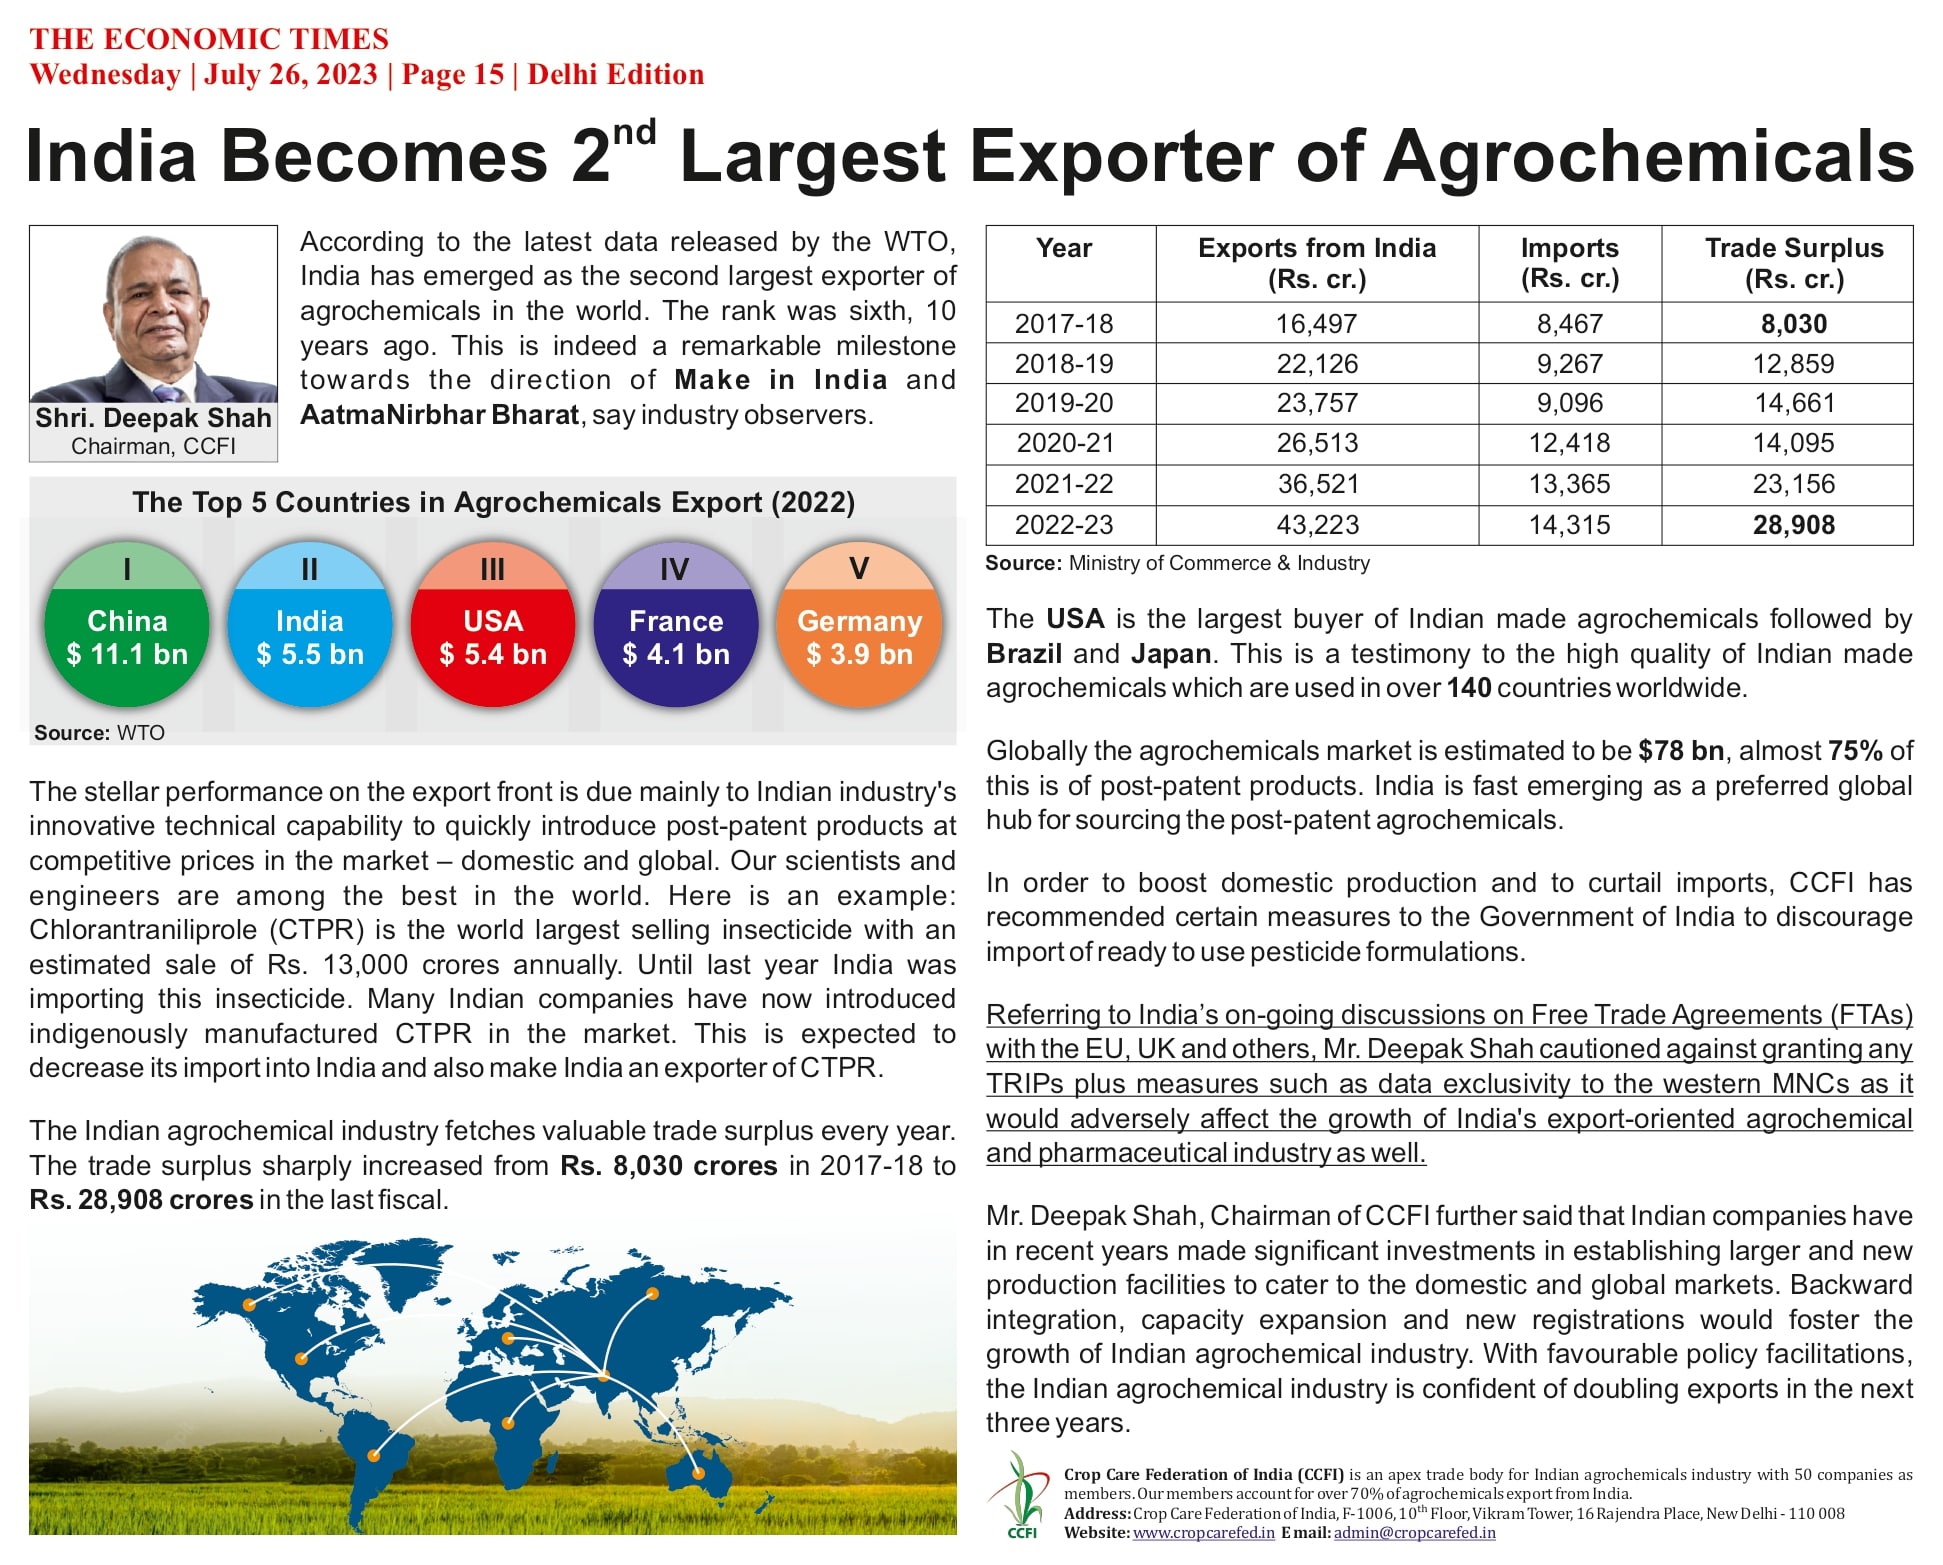 India Becomes 2nd largest exporter of agrochemicals